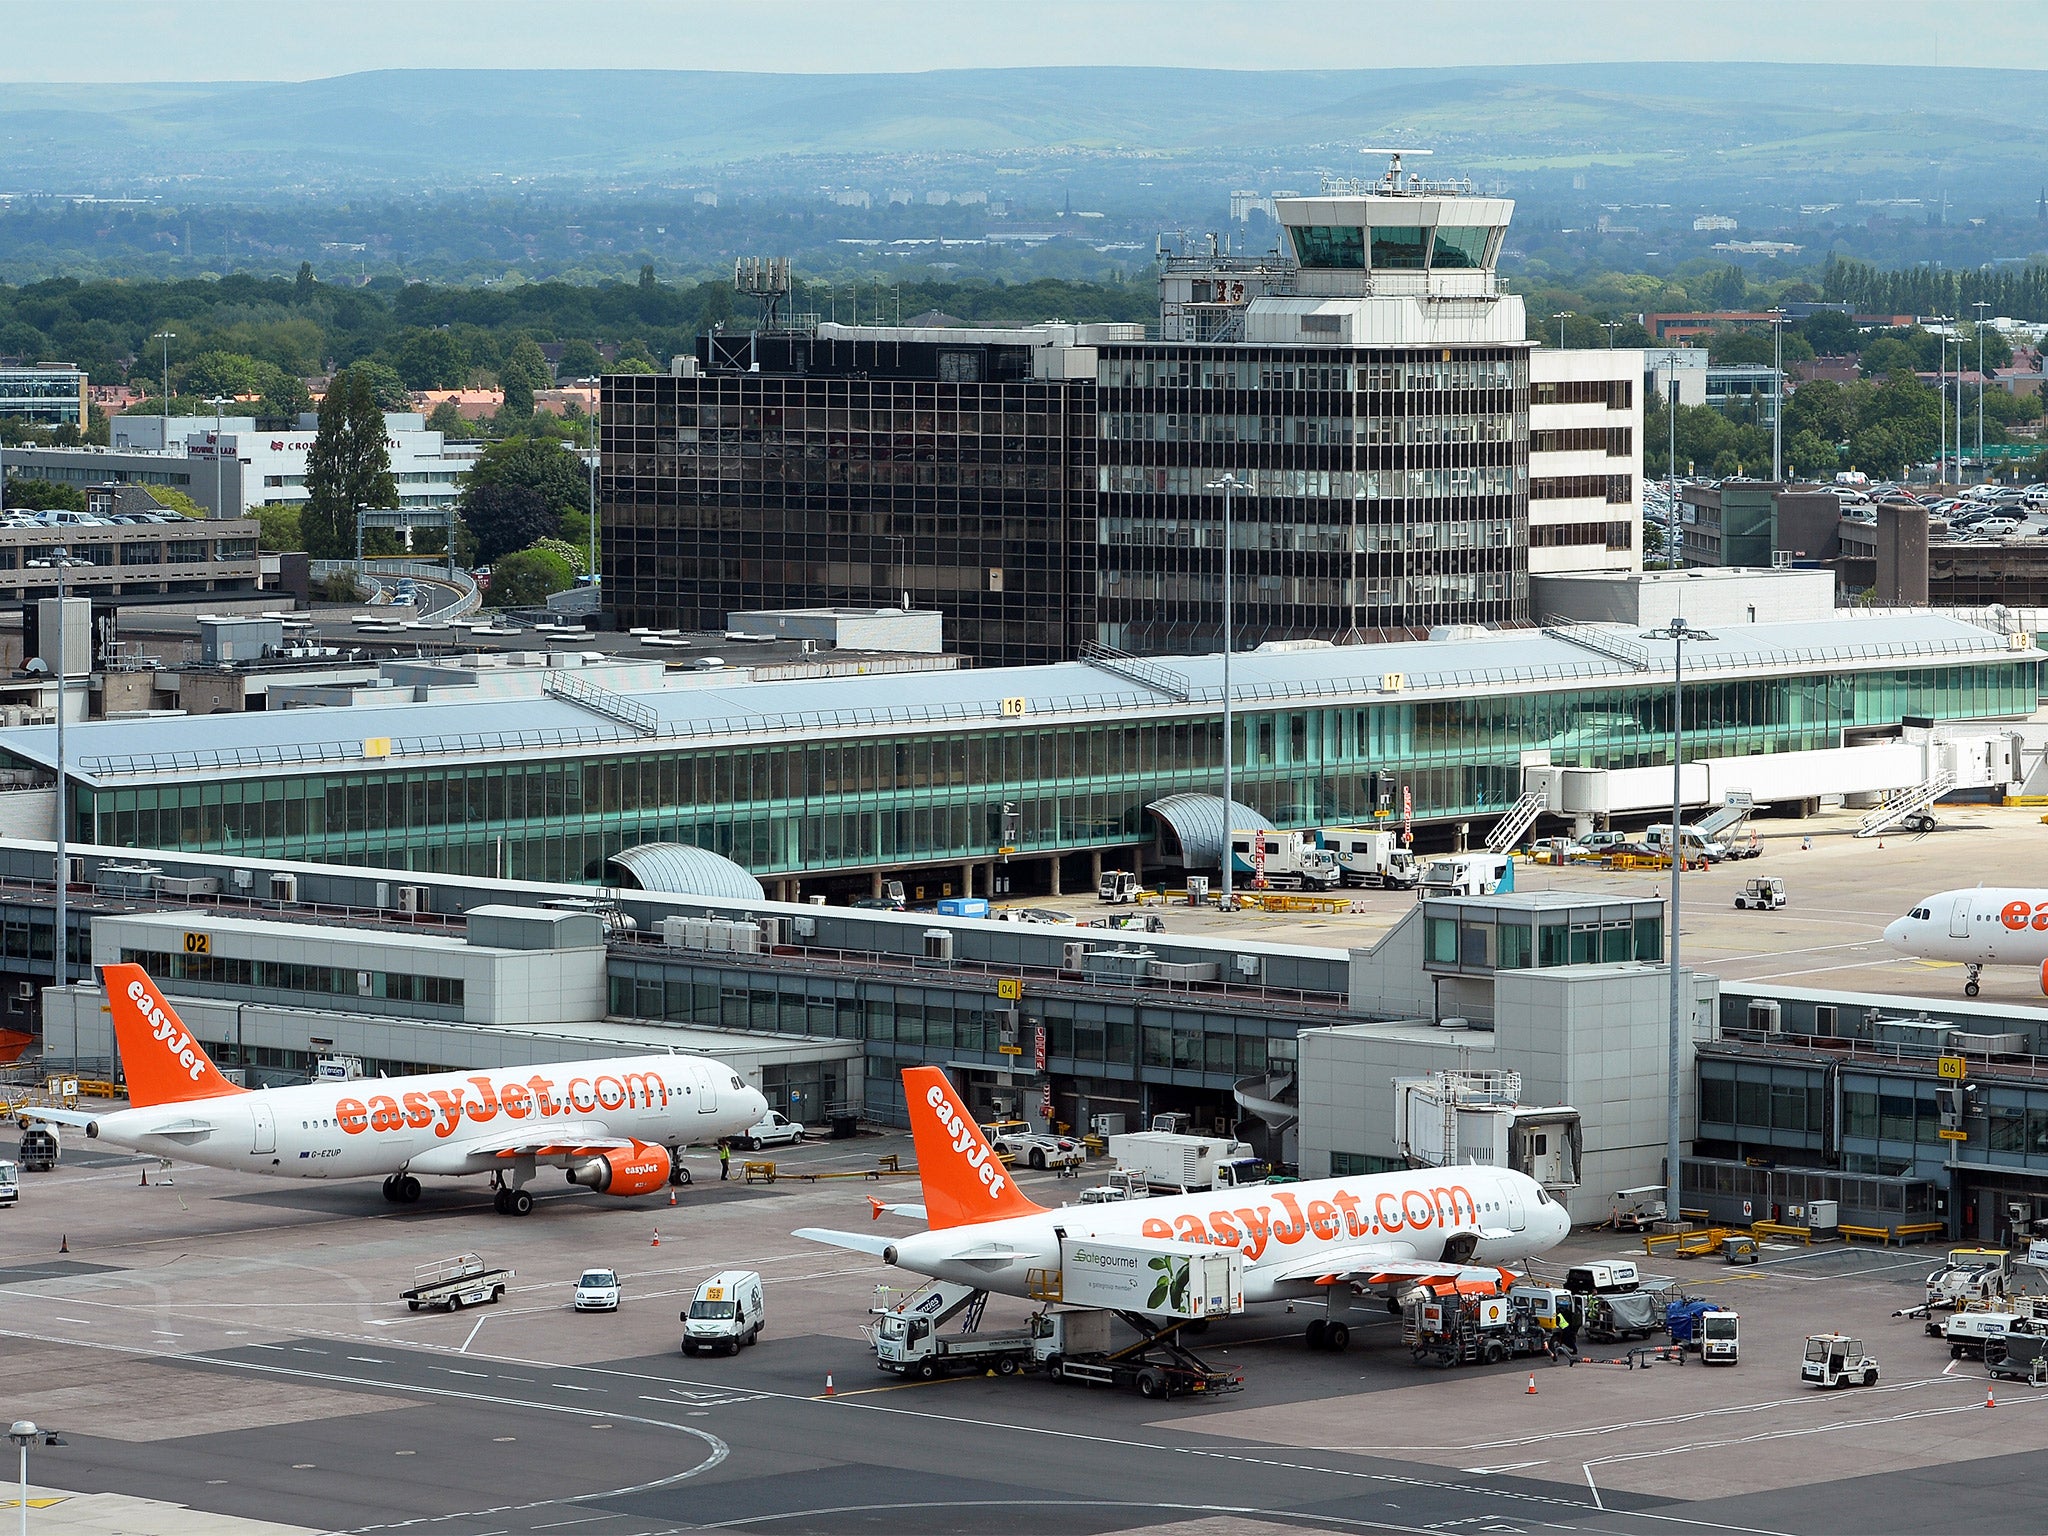 The planes were unable to land at Manchester Airport